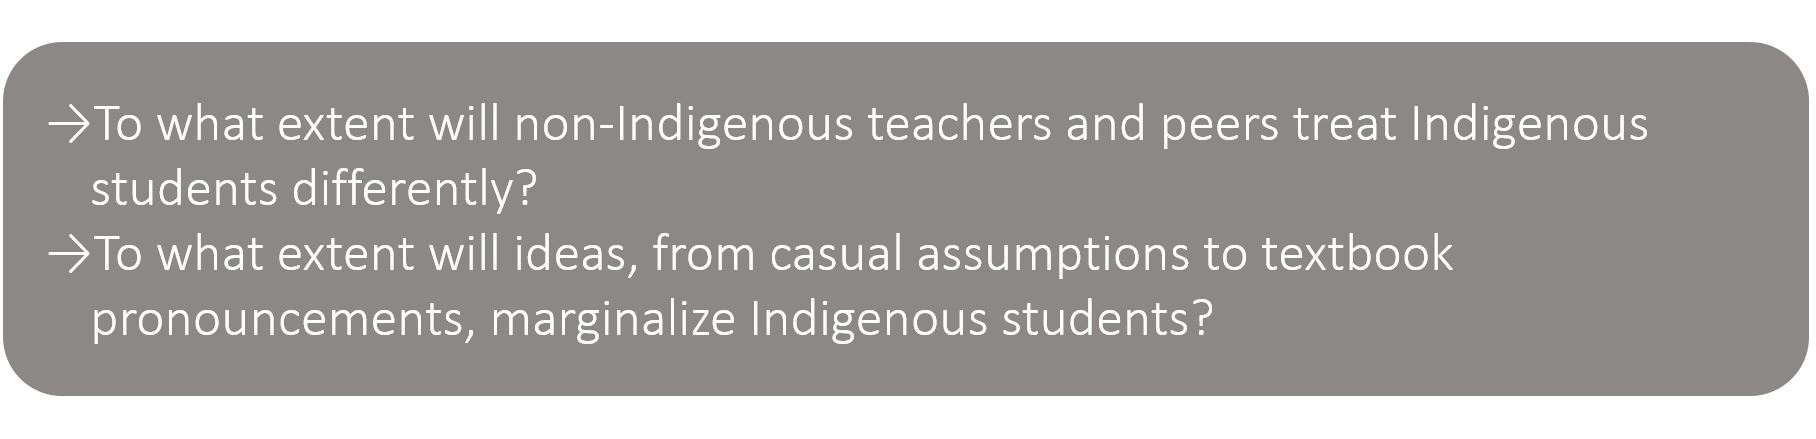 To what extent will non-Indigenous teachers and peers treat Indigenous students differently? To what extent will ideas, from casual assumptions to textbook pronouncements, marginalize Indigenous students?